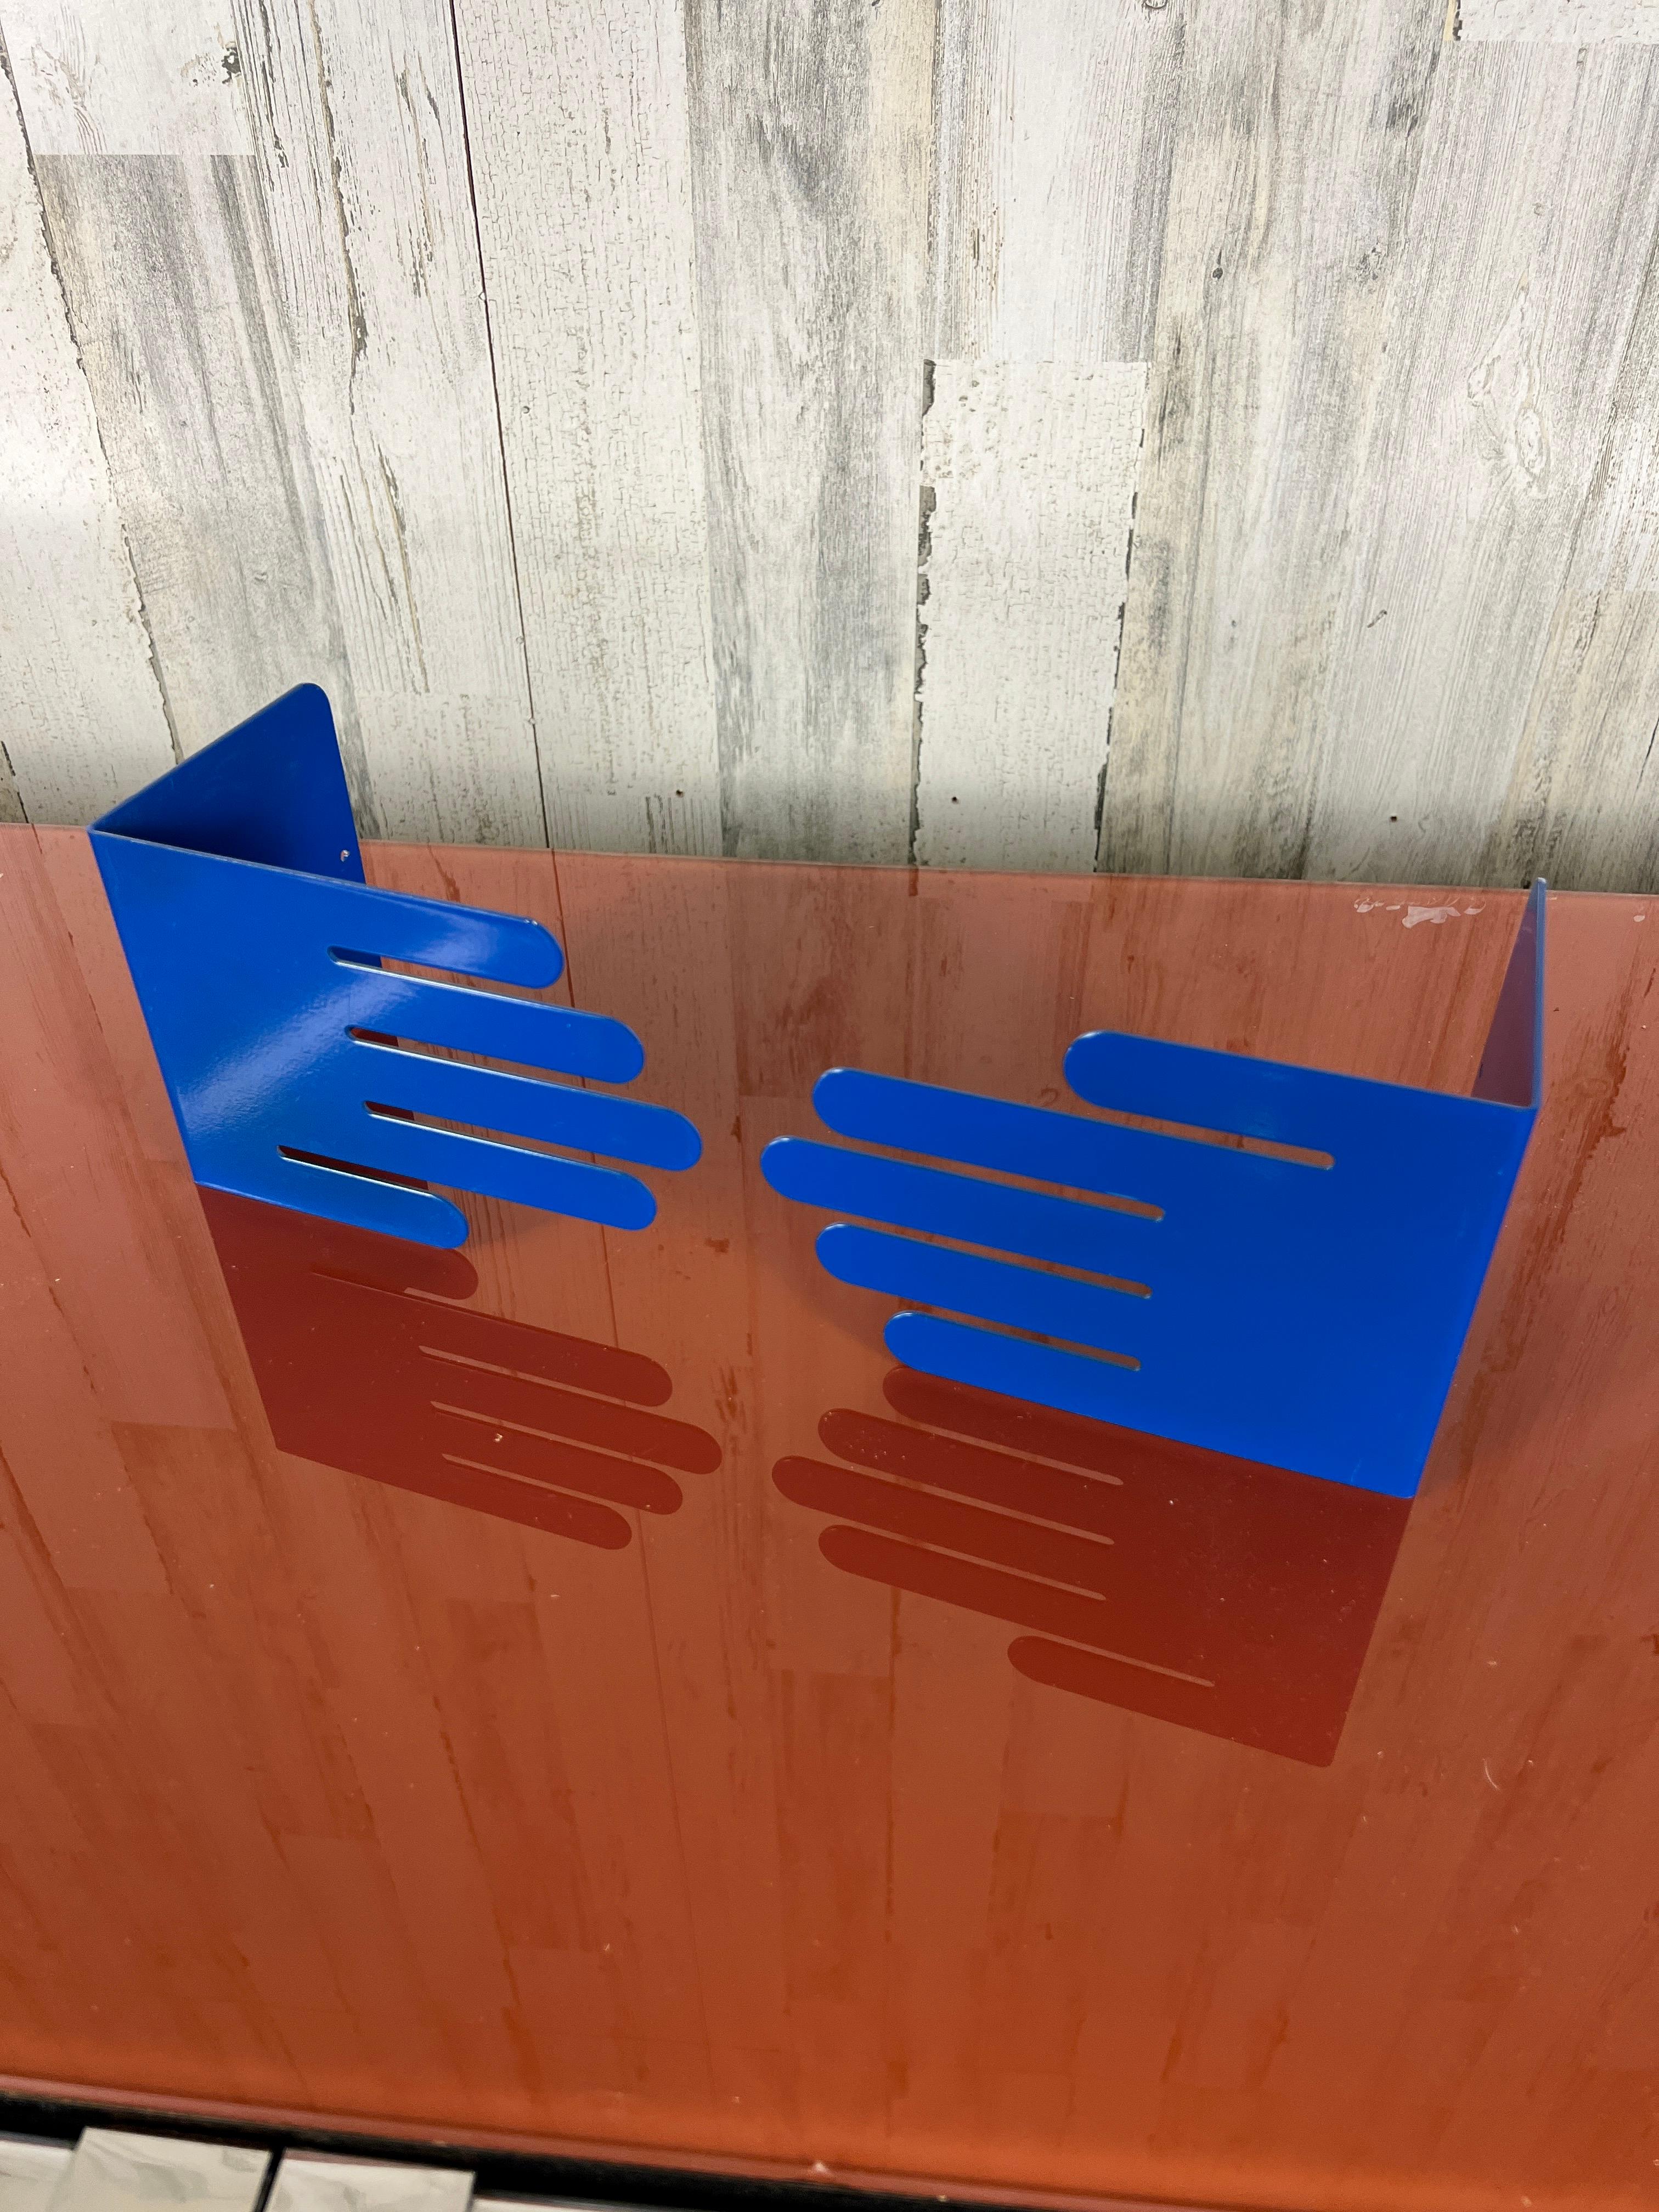 Post Modern by Spectrum Designs Hand shaped bookends in a royal blue color, exemplifying the best of postmodern design. Made by Spectrum Designs of Cleveland, OH.

In good vintage condition with normal signs of wear.